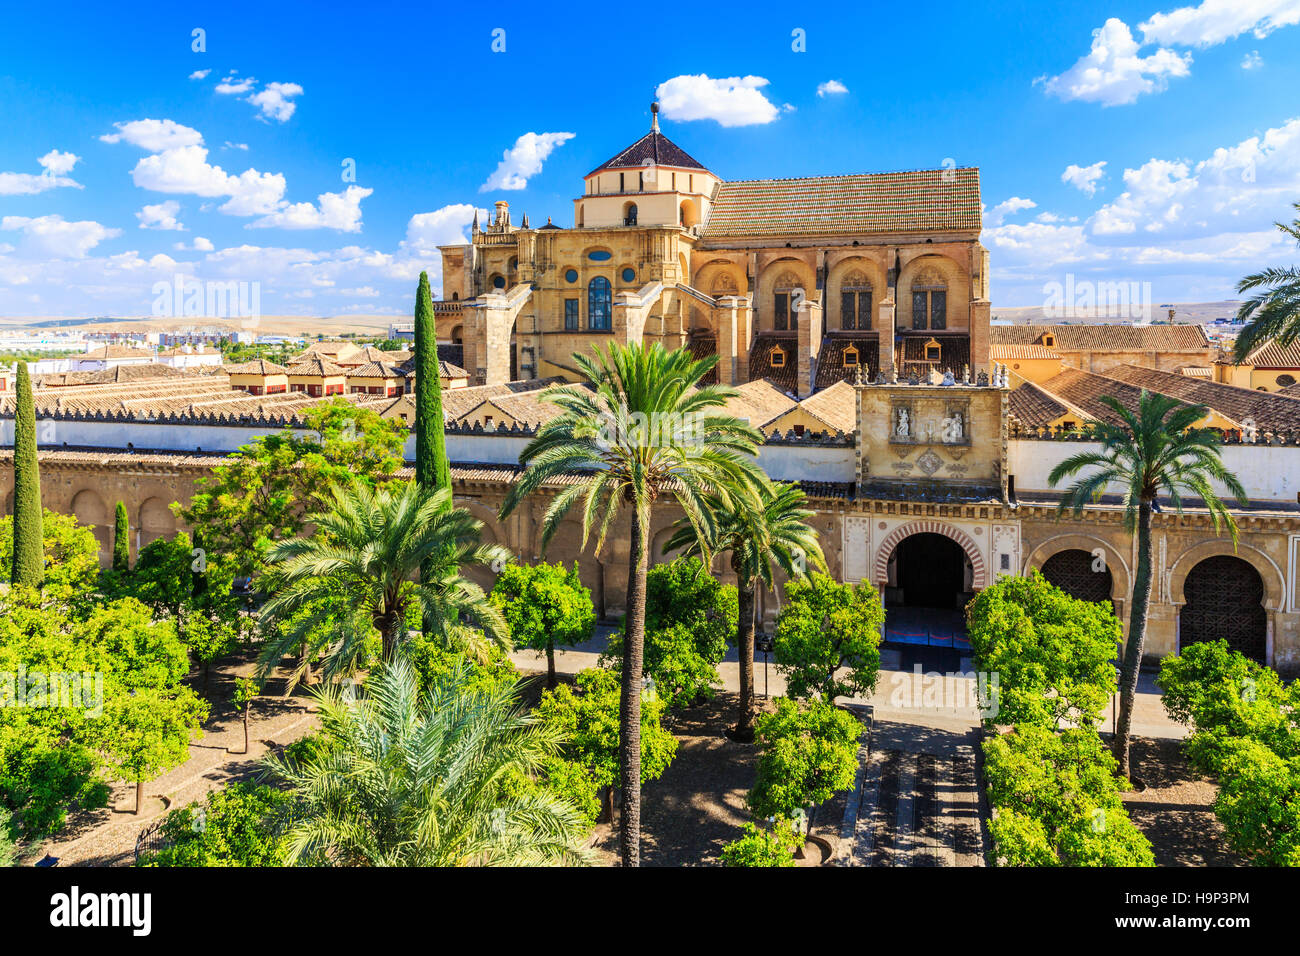 Cordoba, Spain. The Mezquita Mosque-Cathedral. Stock Photo